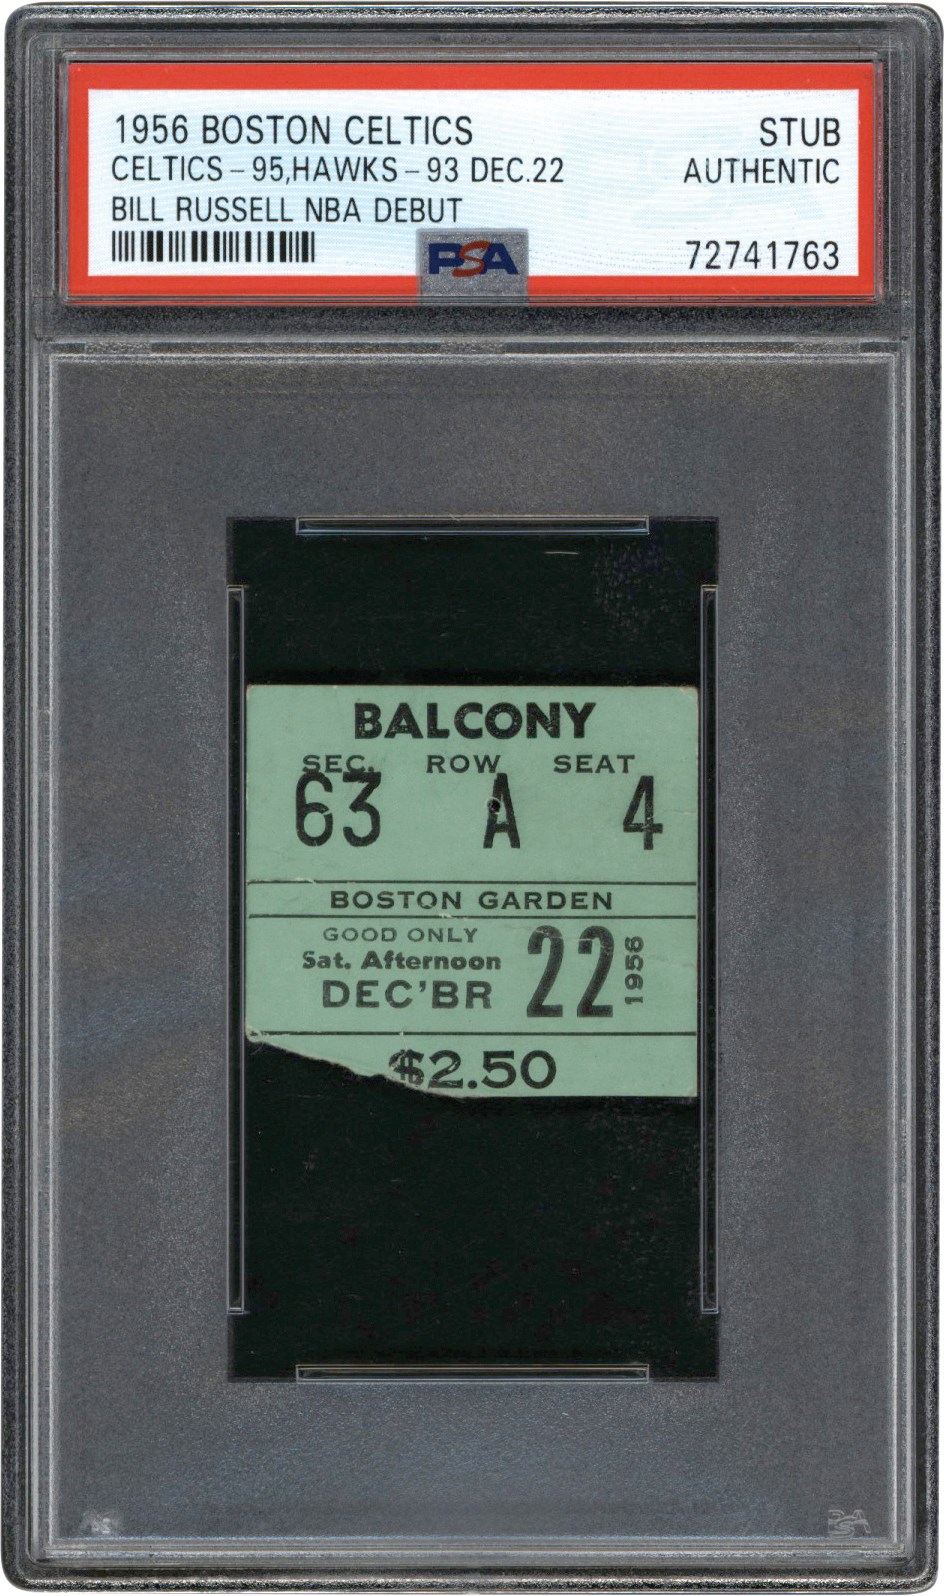 - December 22,1956, Bill Russell NBA Debut Ticket Stub PSA Authentic (1 of 1 Only Known Example)